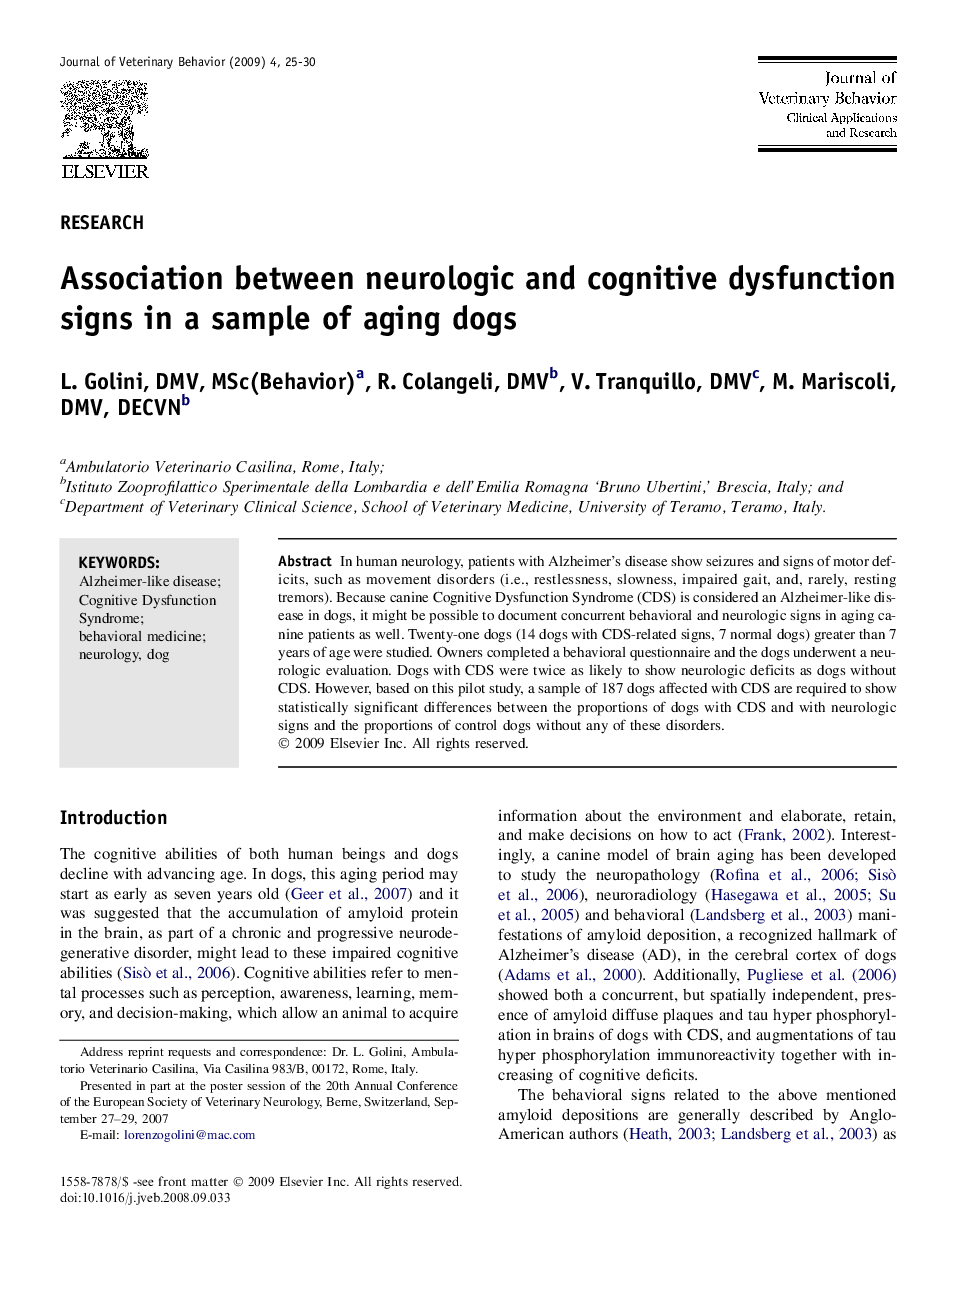 Association between neurologic and cognitive dysfunction signs in a sample of aging dogs 